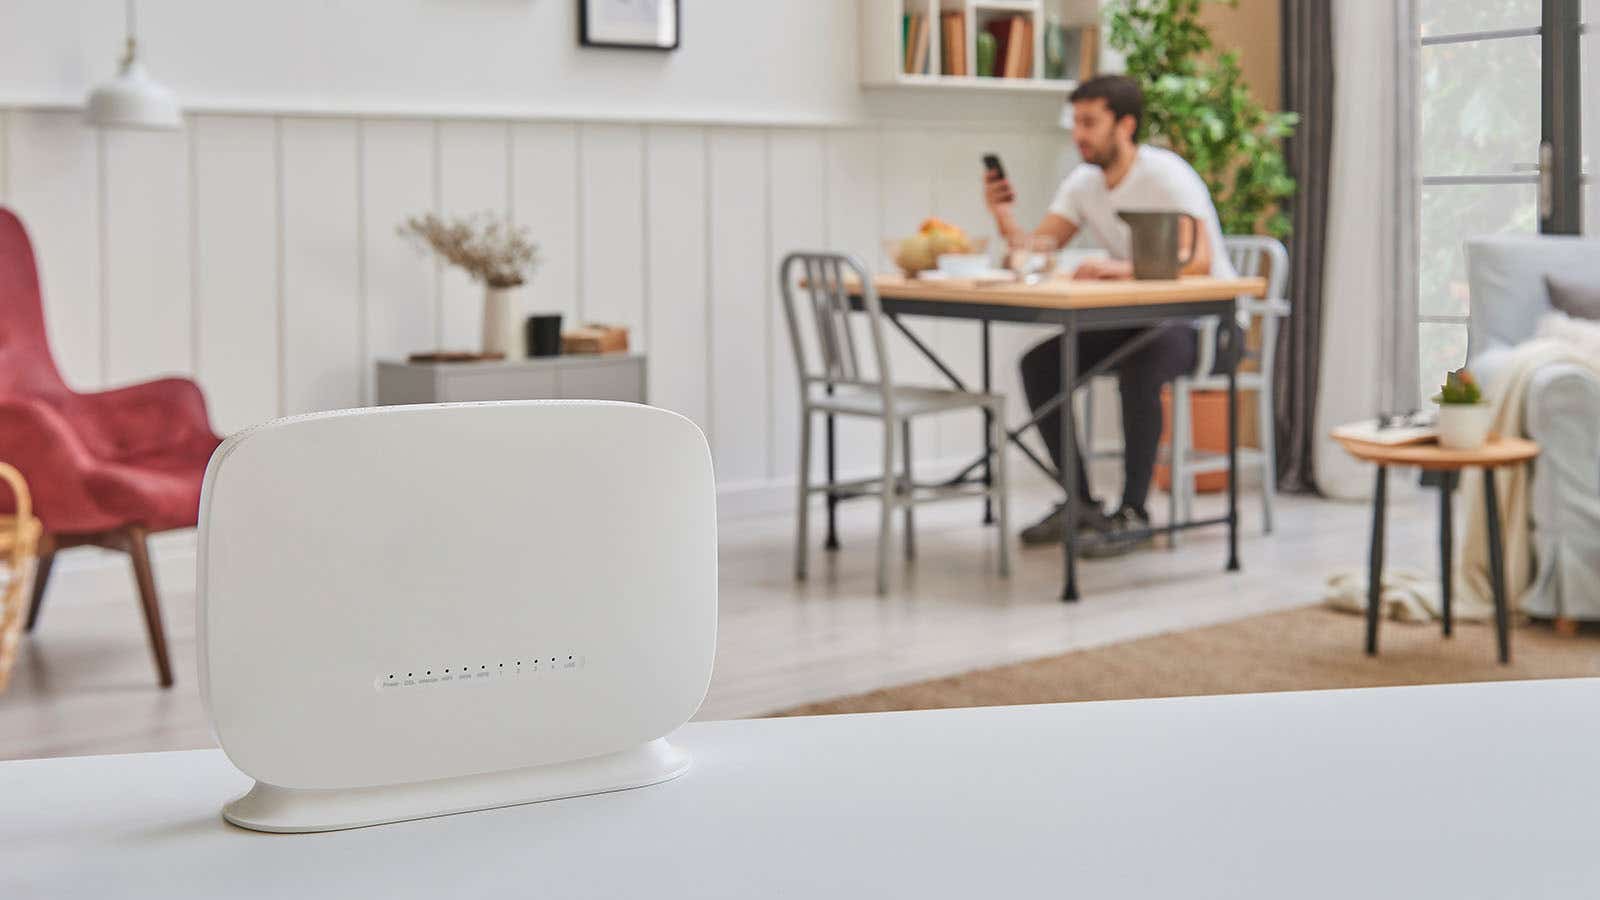 a wireless router with a man using the internet behind it